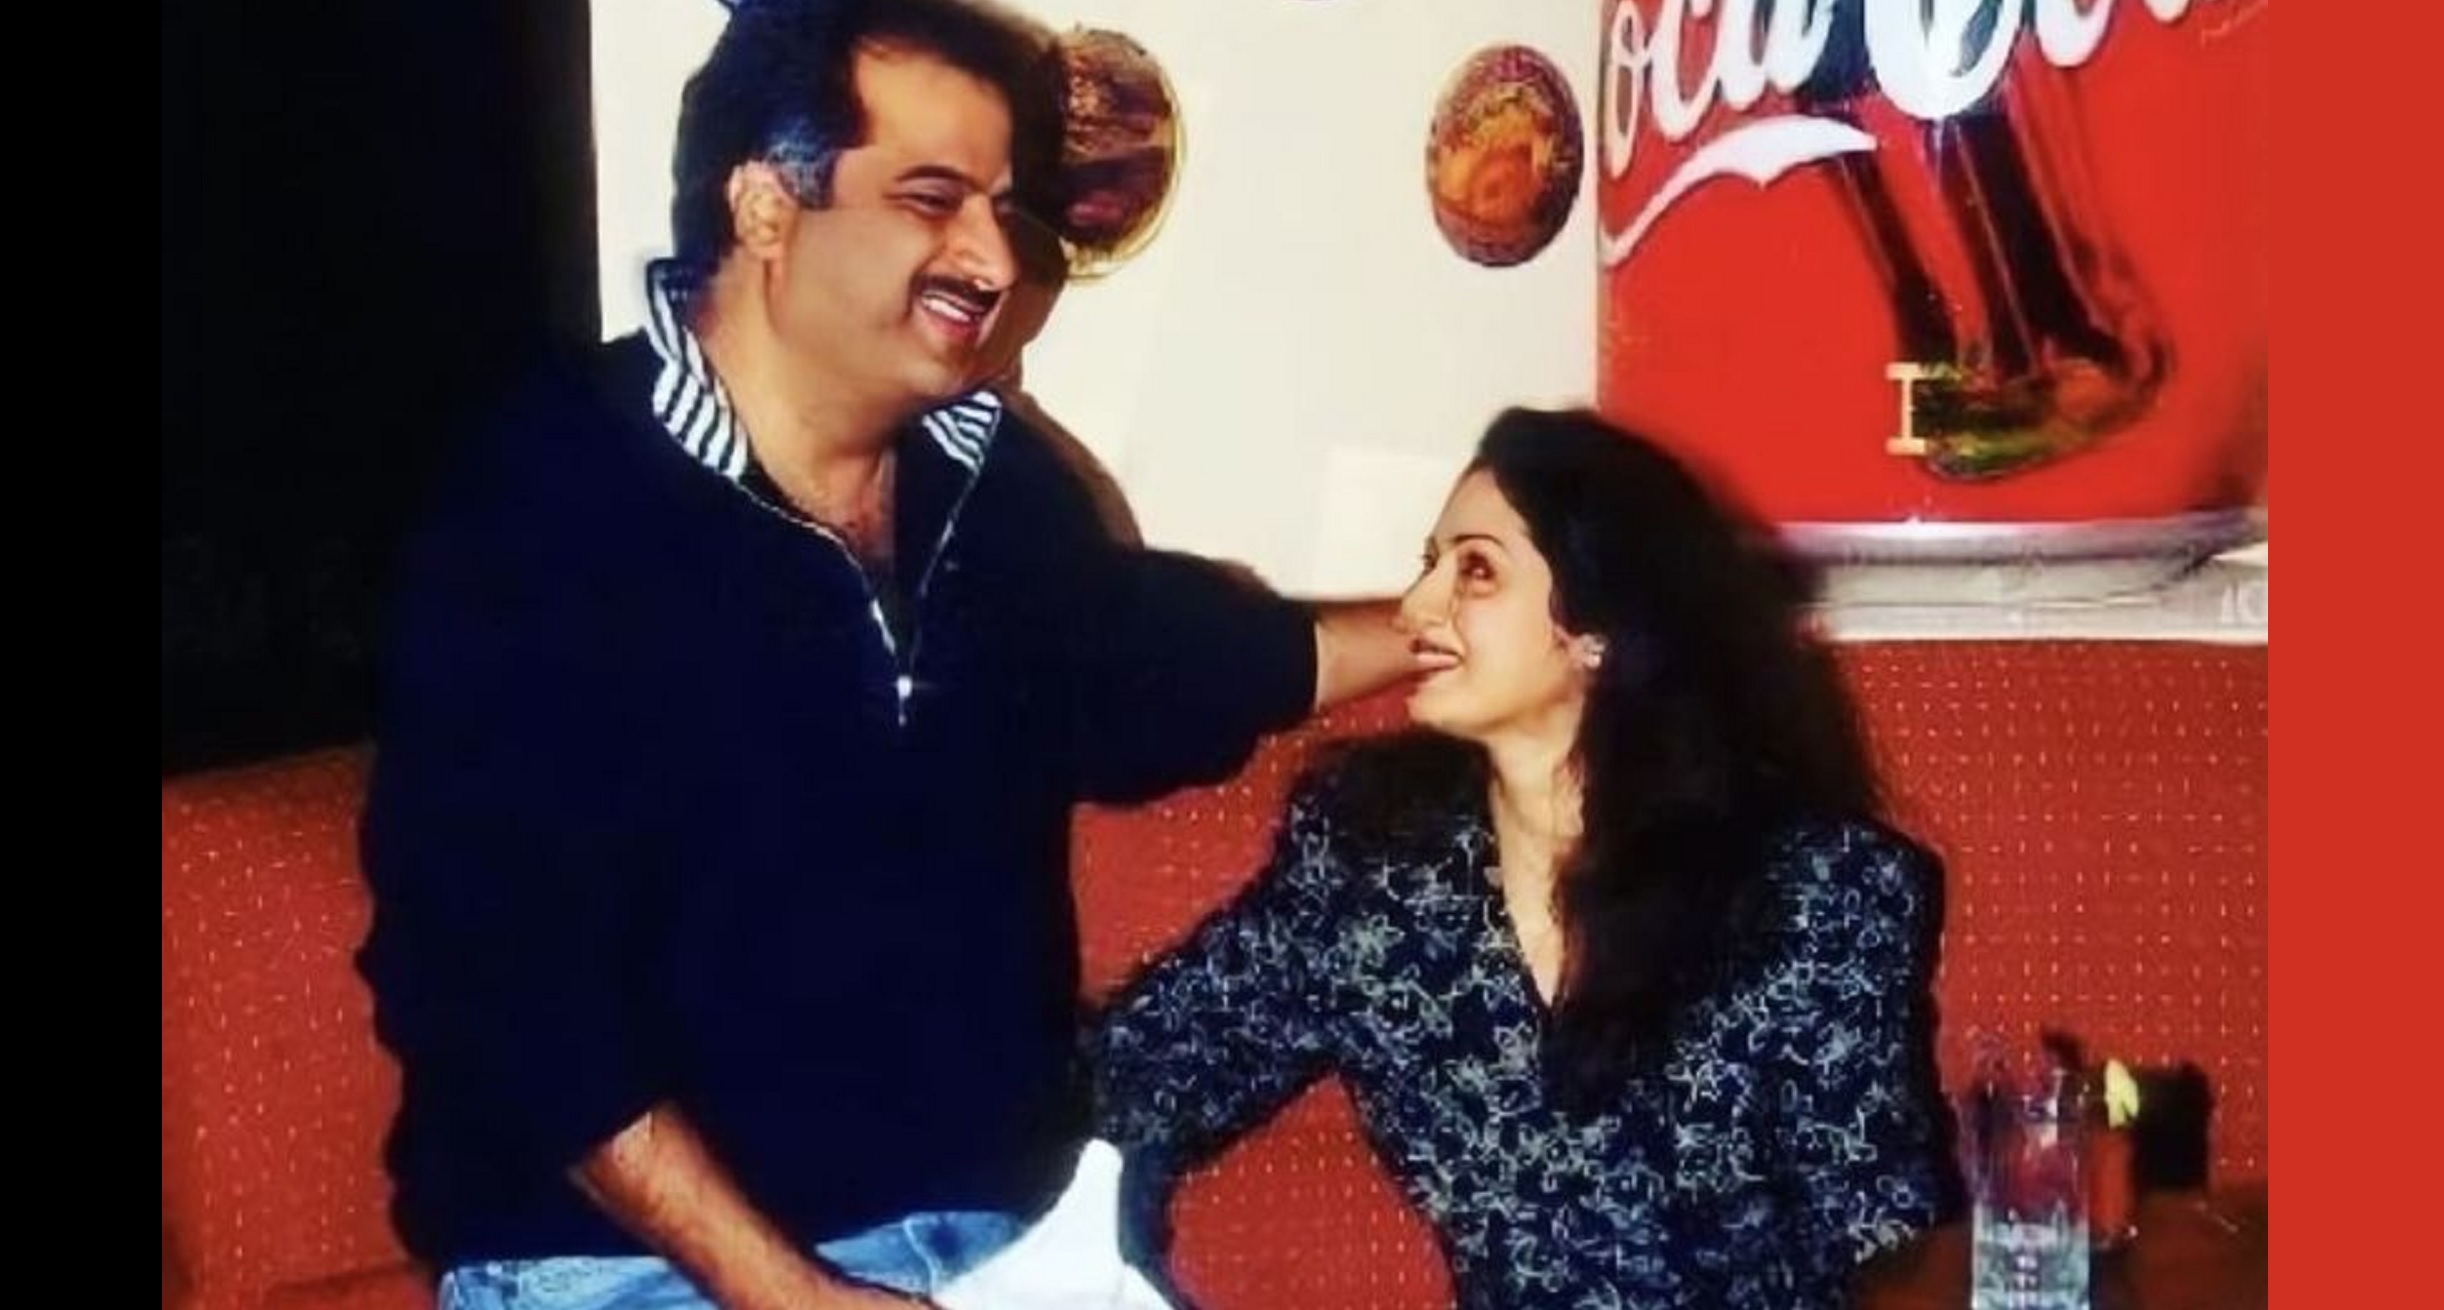 Boney Kapoor Shares Old Picture With Sri Devi, As He Remembers Late Wife, “It was just happiness”